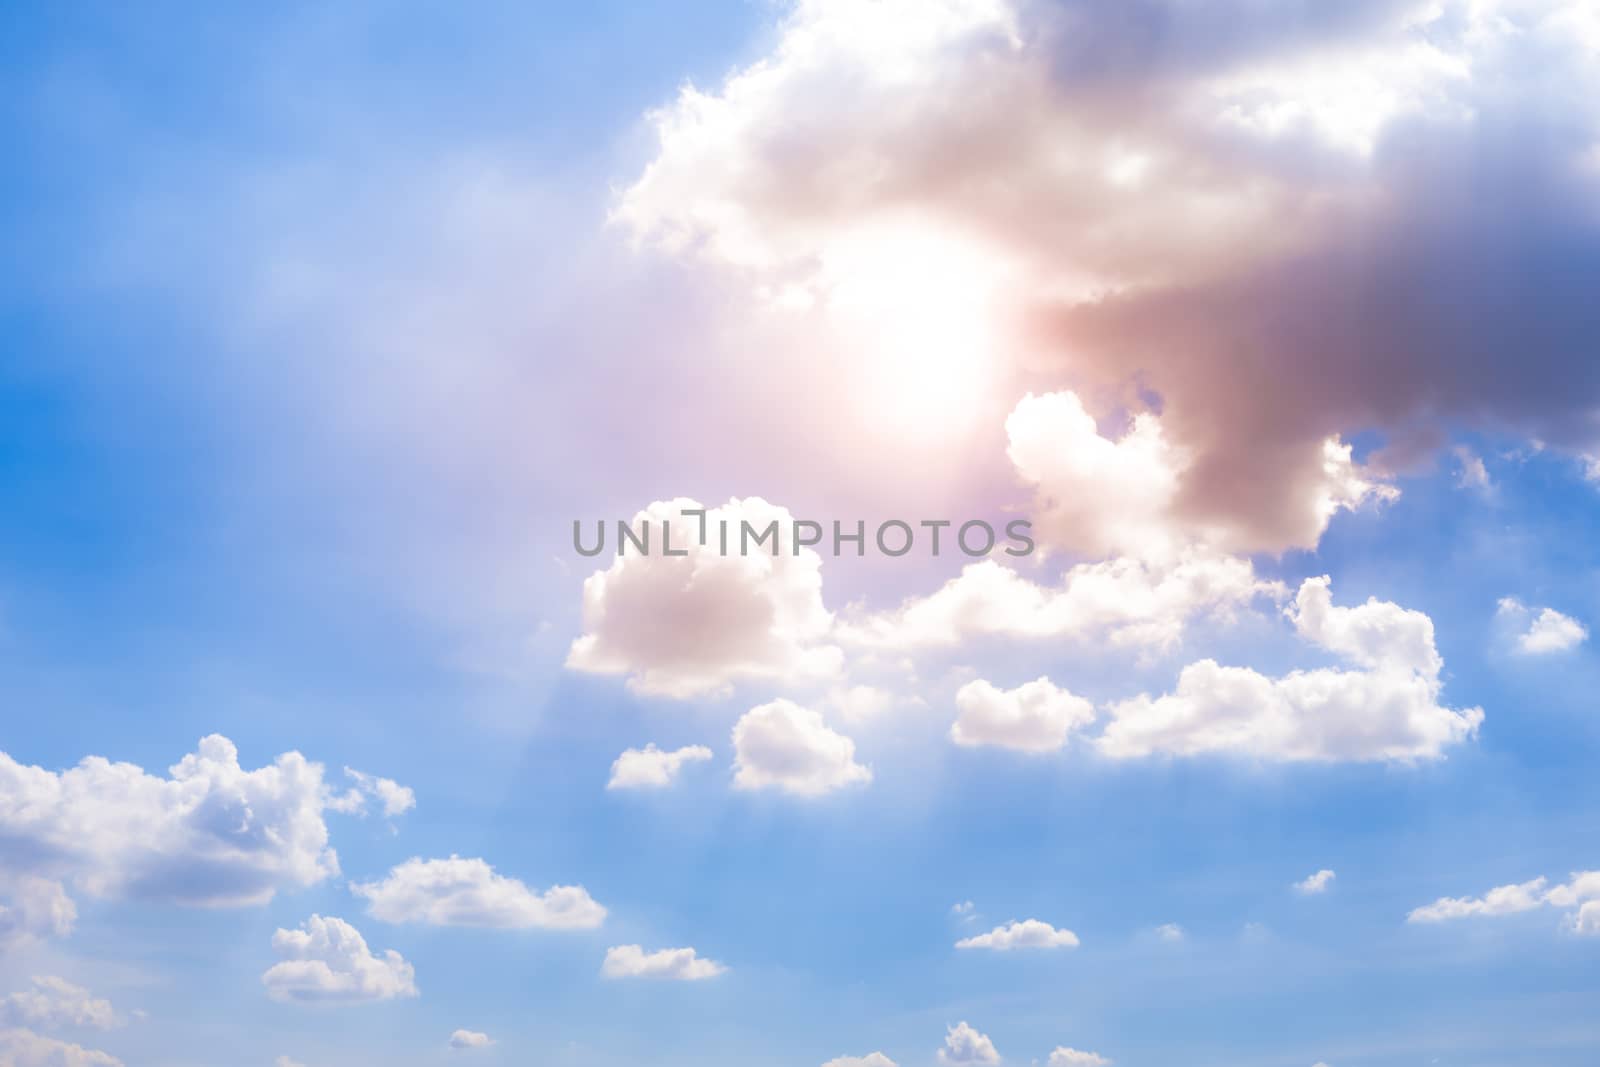 The clear sky view with white clouds and sunlight.